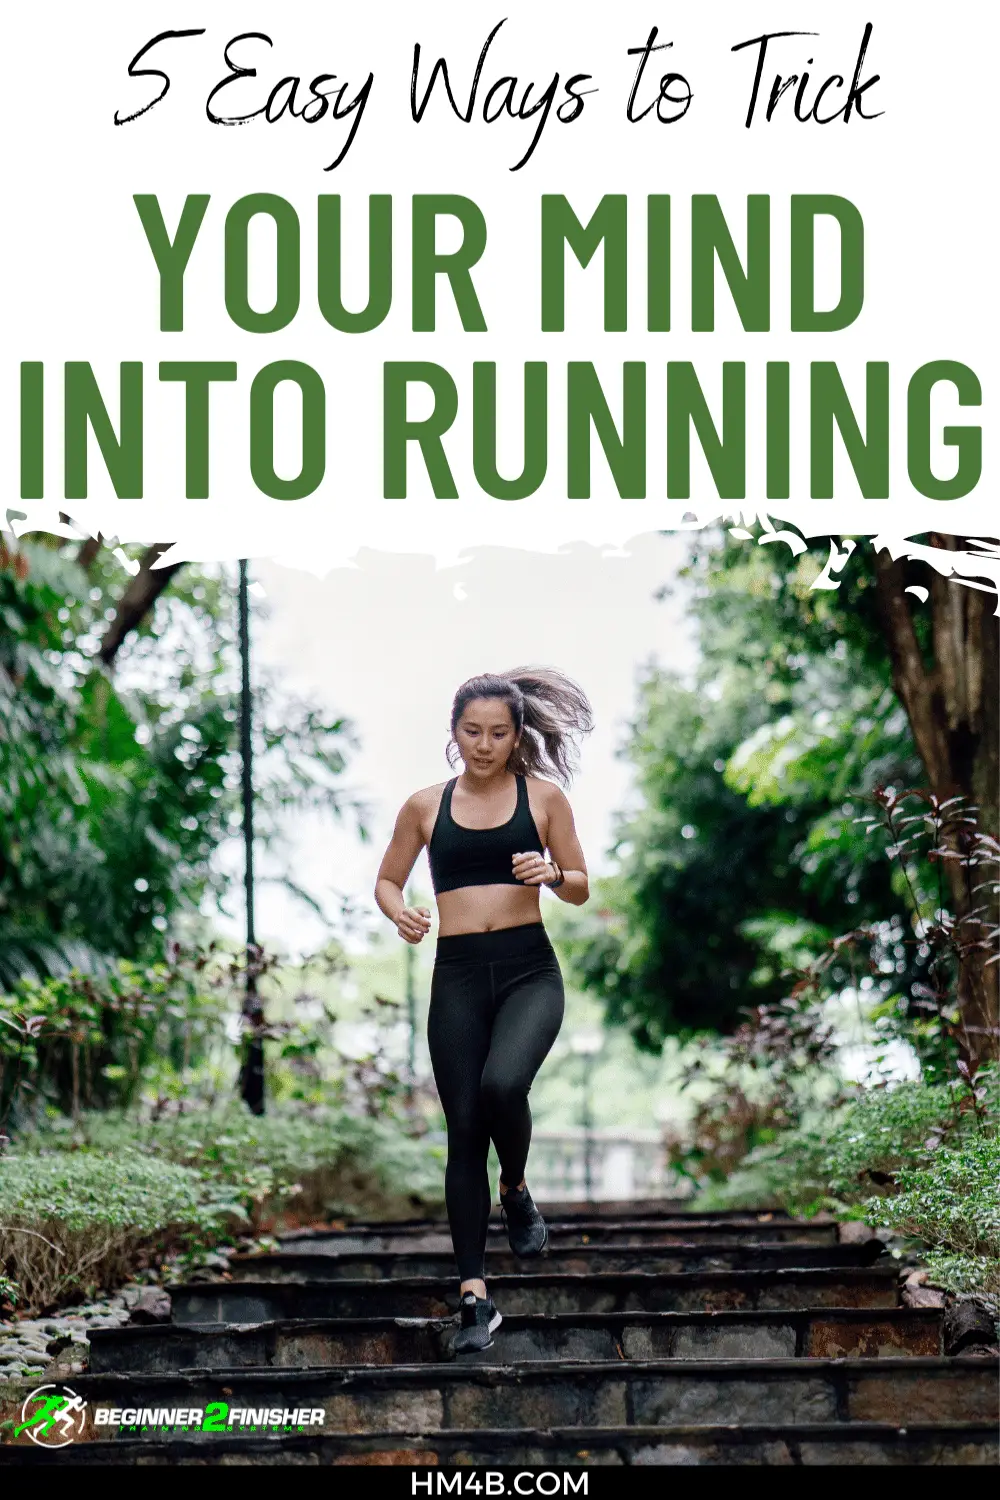 5 easy ways to trick your mind into running